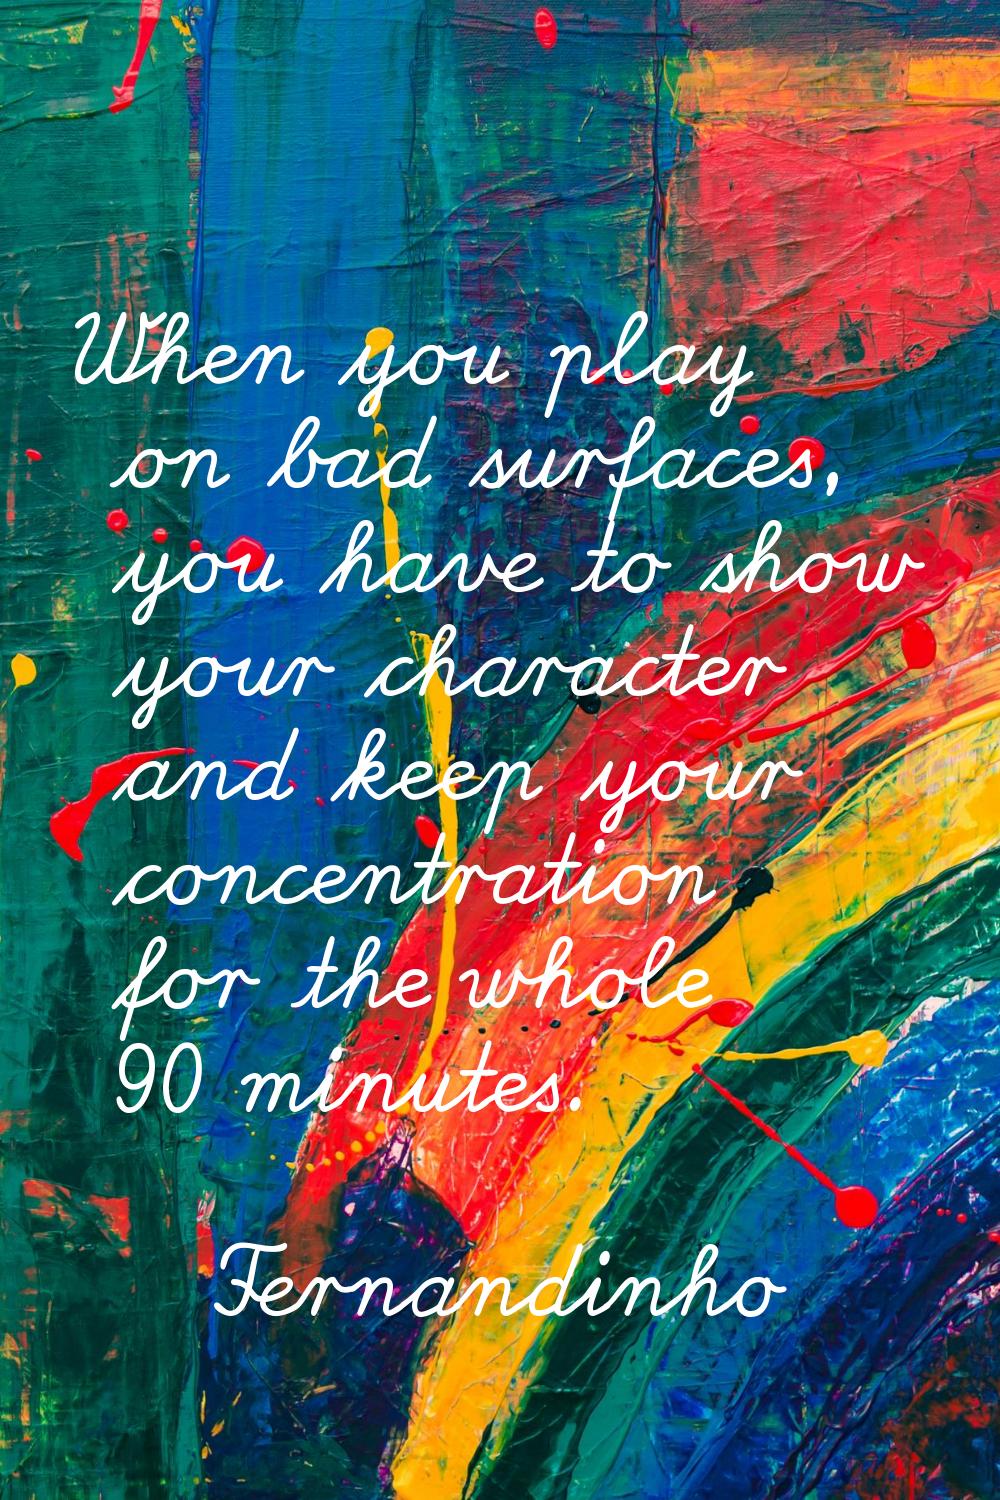 When you play on bad surfaces, you have to show your character and keep your concentration for the 